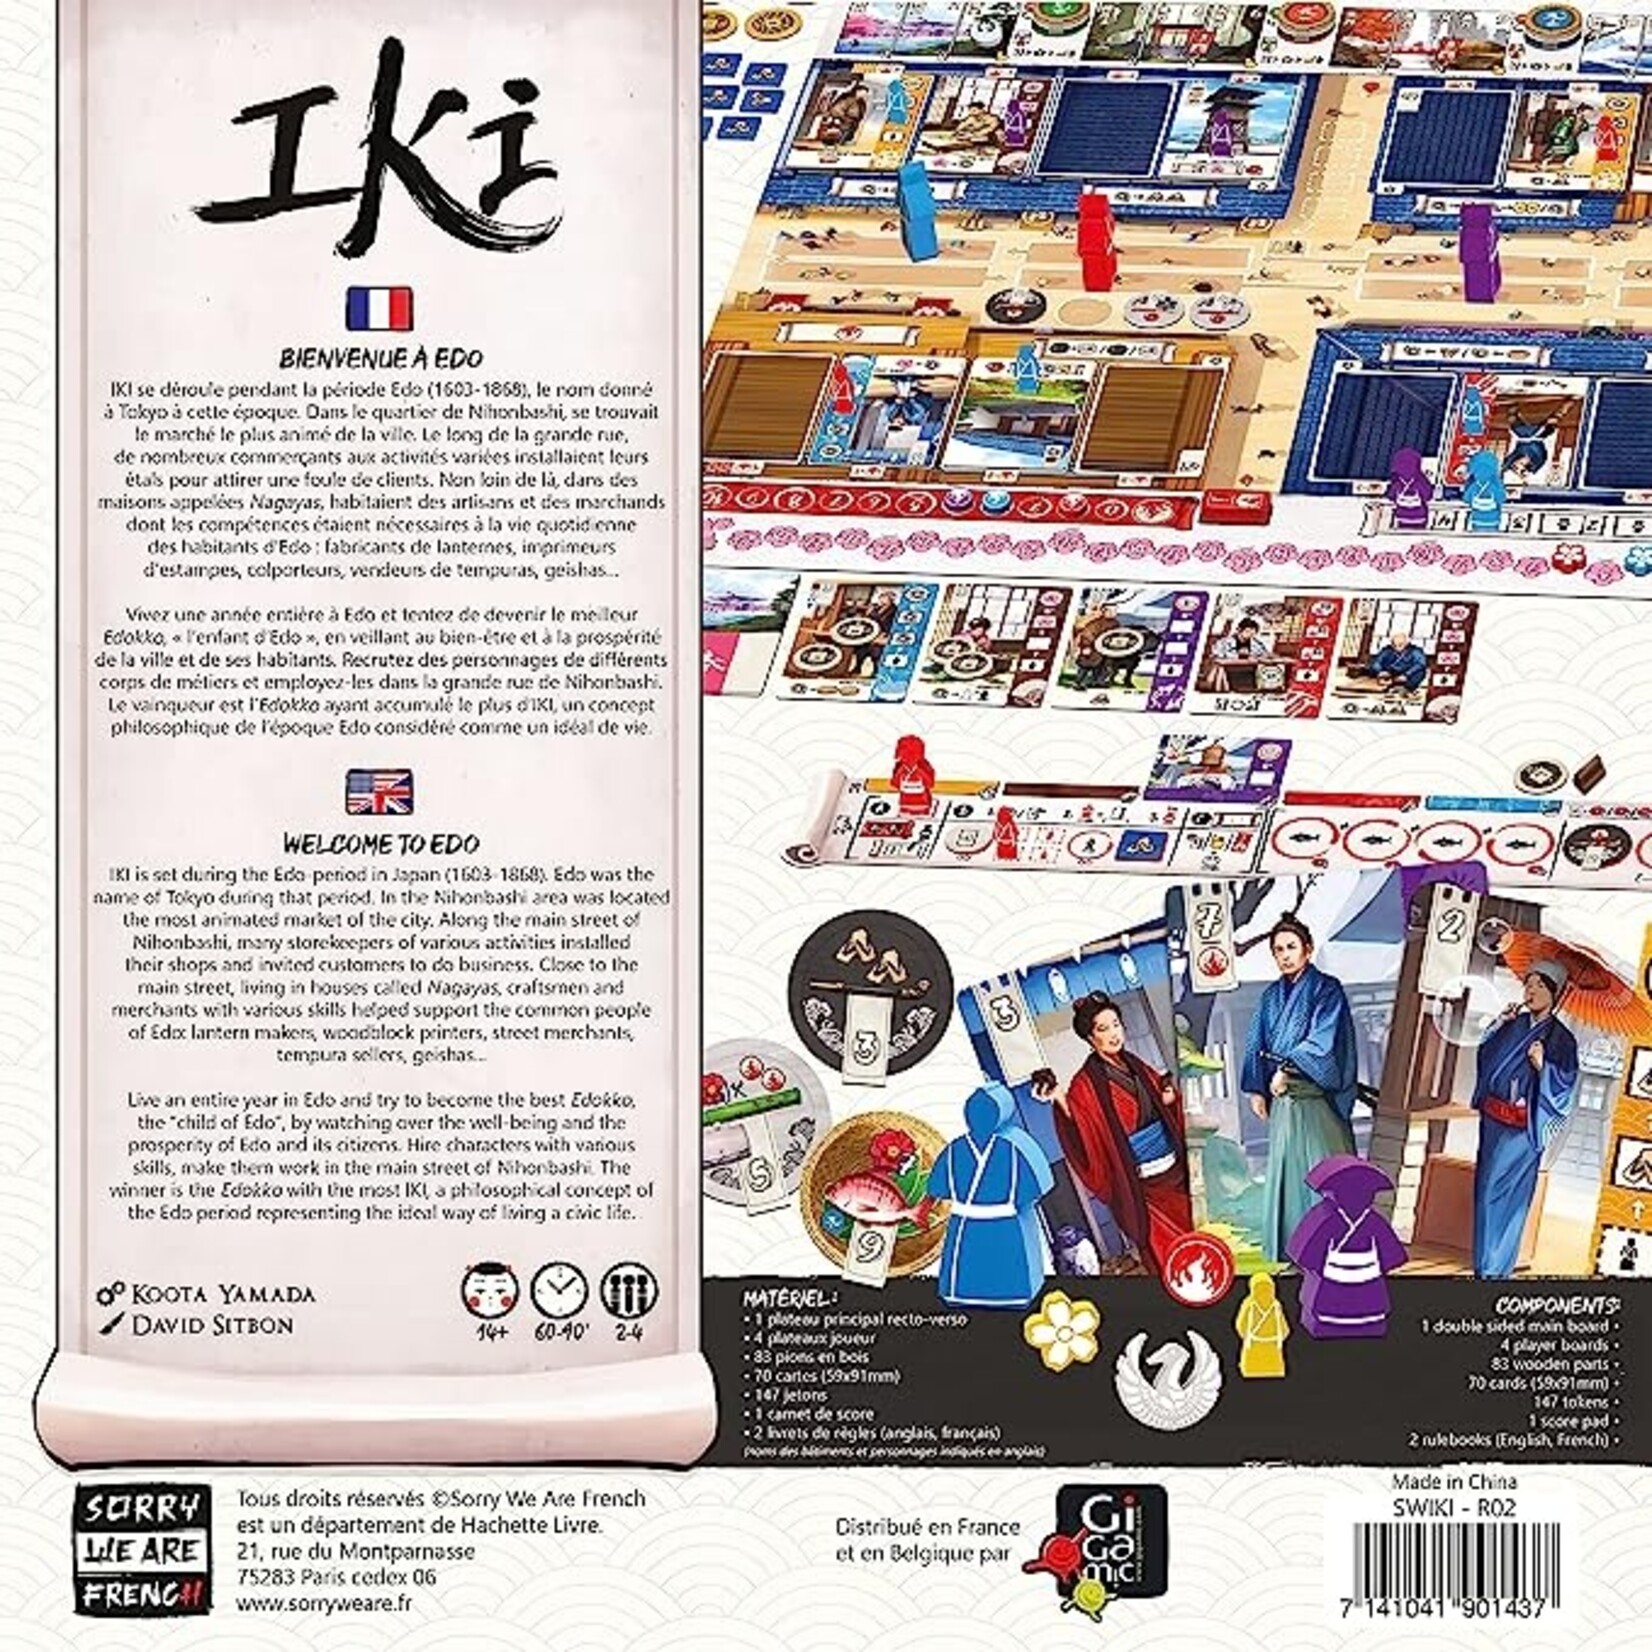 Sorry We Are French Iki: A Game of EDO Artisans